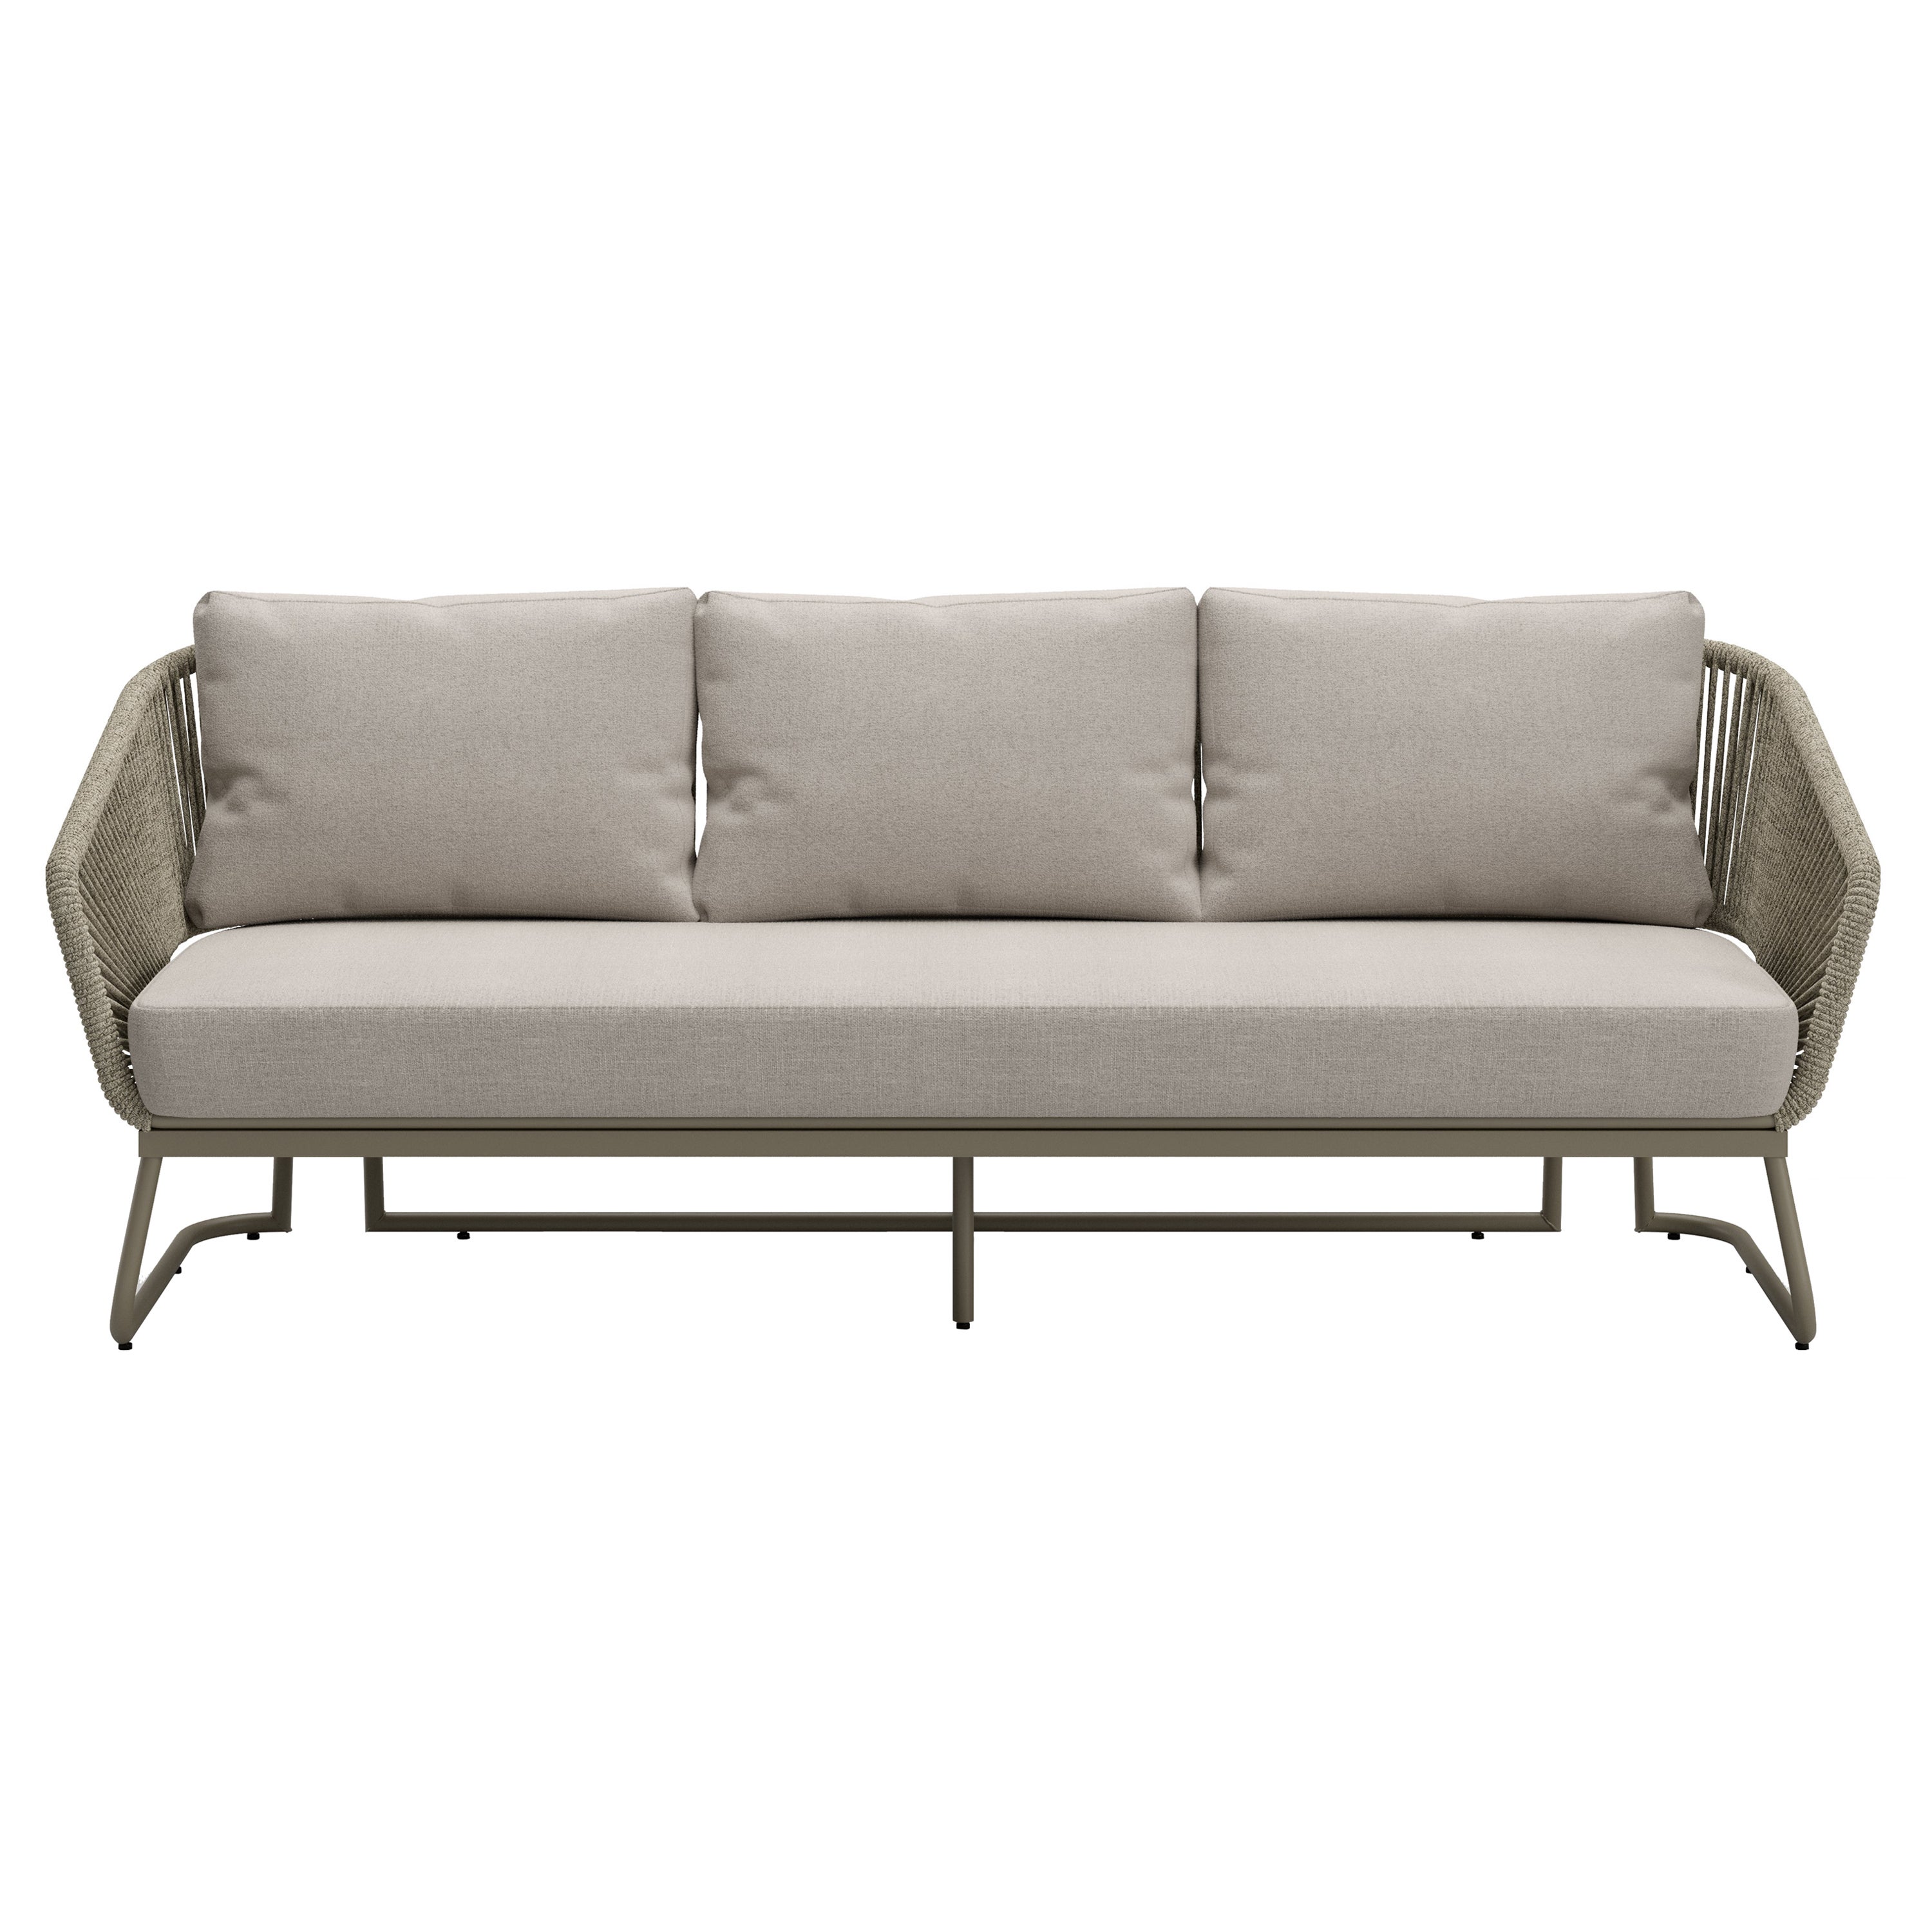 Claude Outdoor 3 Seater Sofa by Snoc For Sale